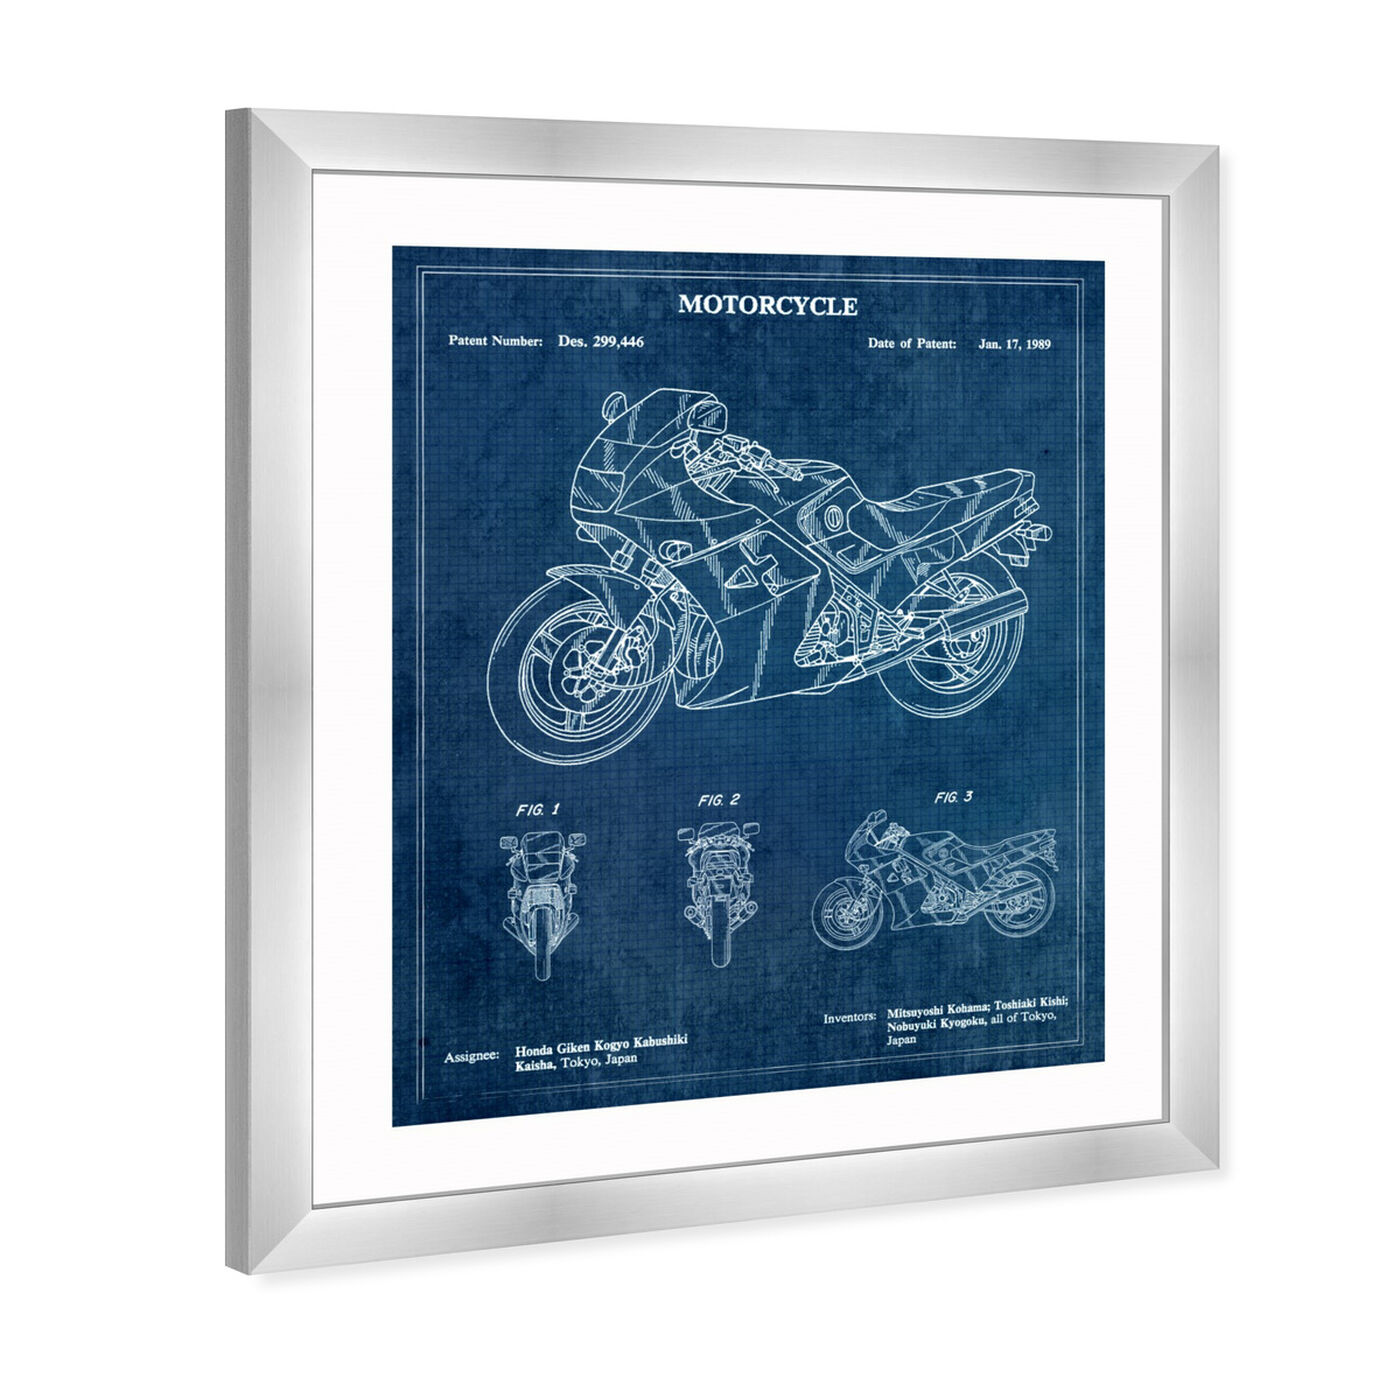 Angled view of Motorcycle 1989 featuring transportation and motorcycles art.